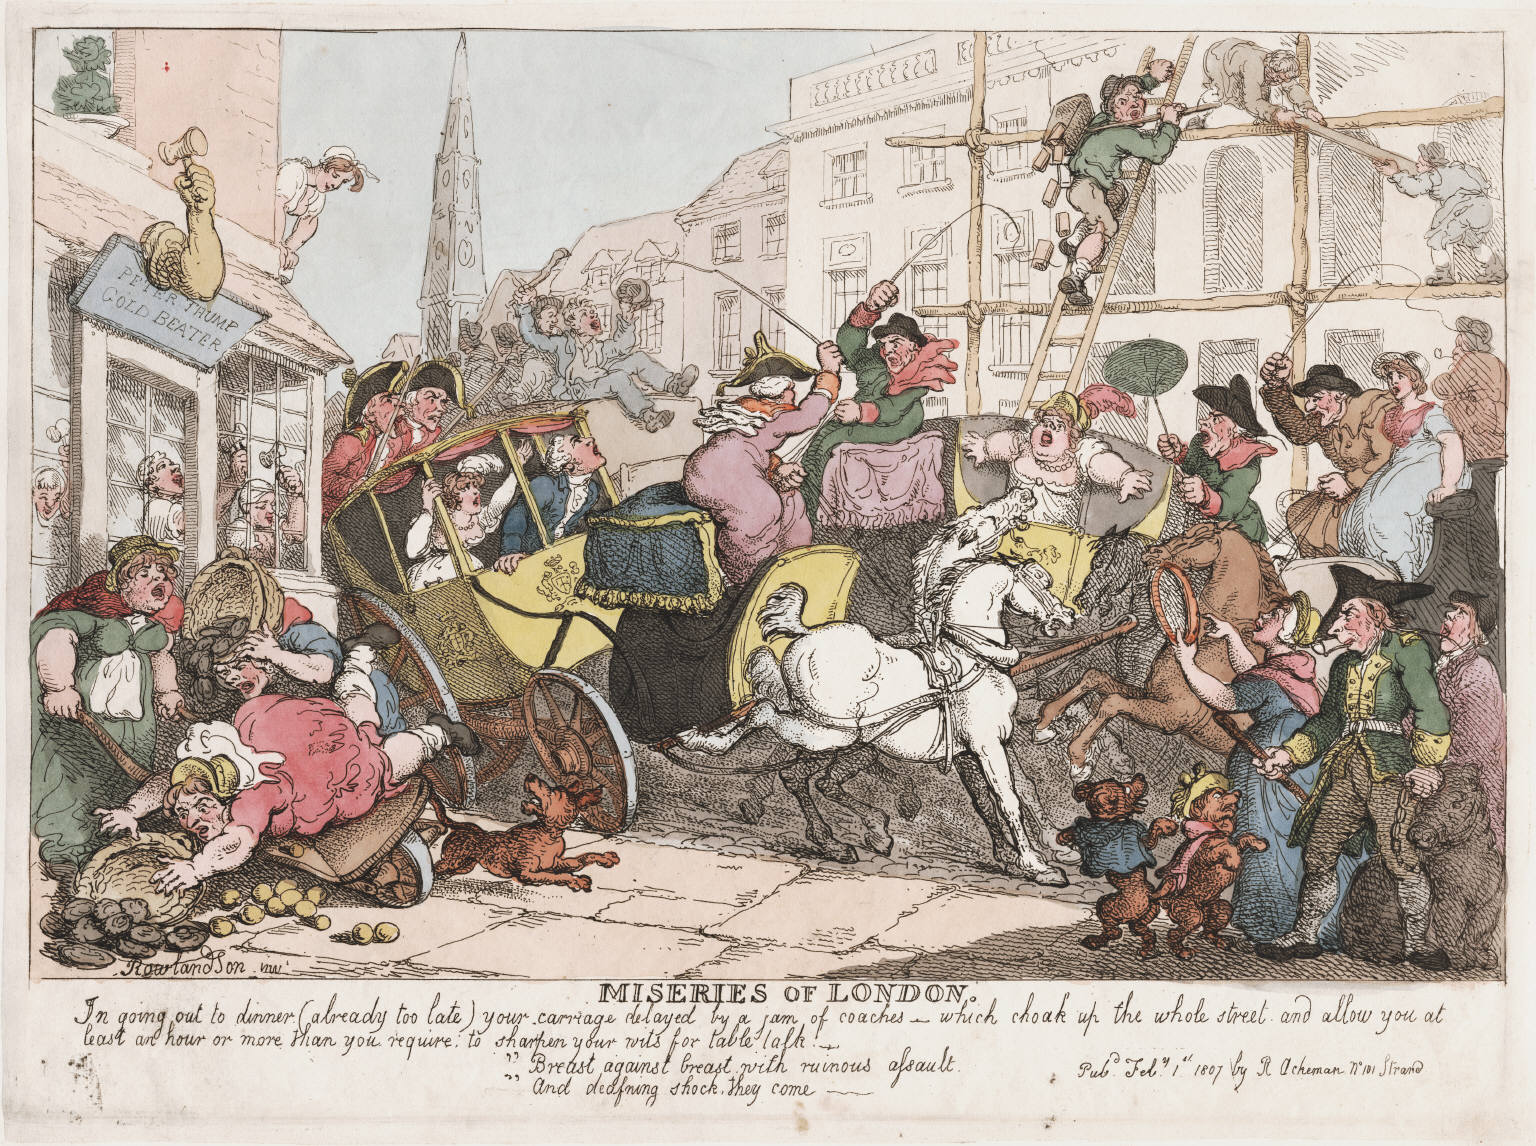 A traffic accident between two coaches on a London street.  The coachmen argue and threaten each other with whips, while the wealthy passengers scream with fright.  A man on a scaffold in the distance drops bricks from his hod, as he views the scene.